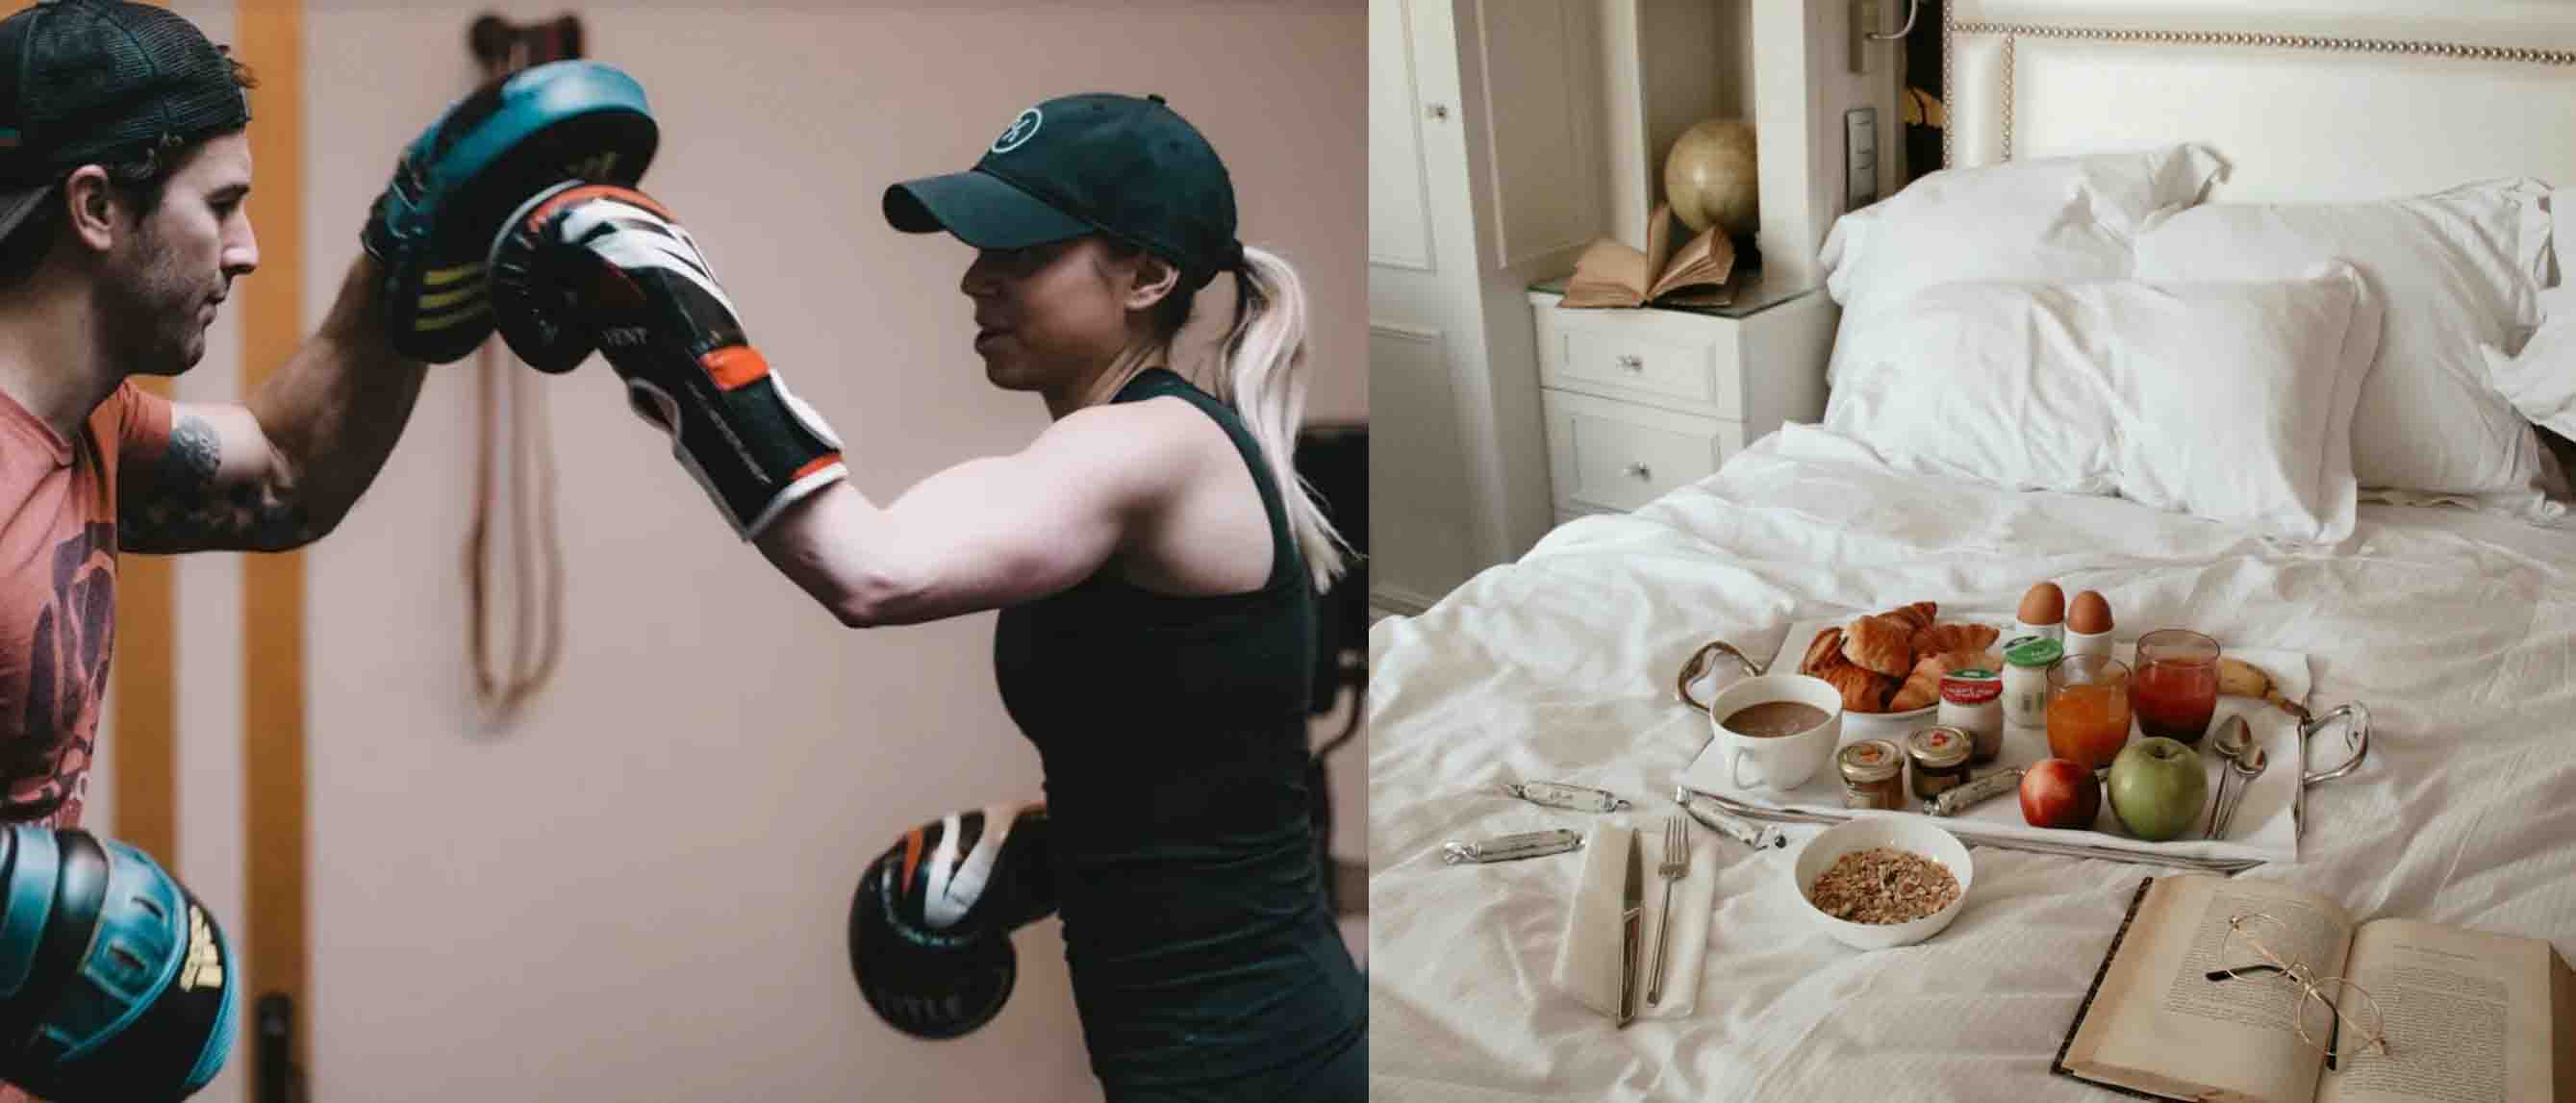 Collage of a man and woman boxing and a breakfast spread in bed